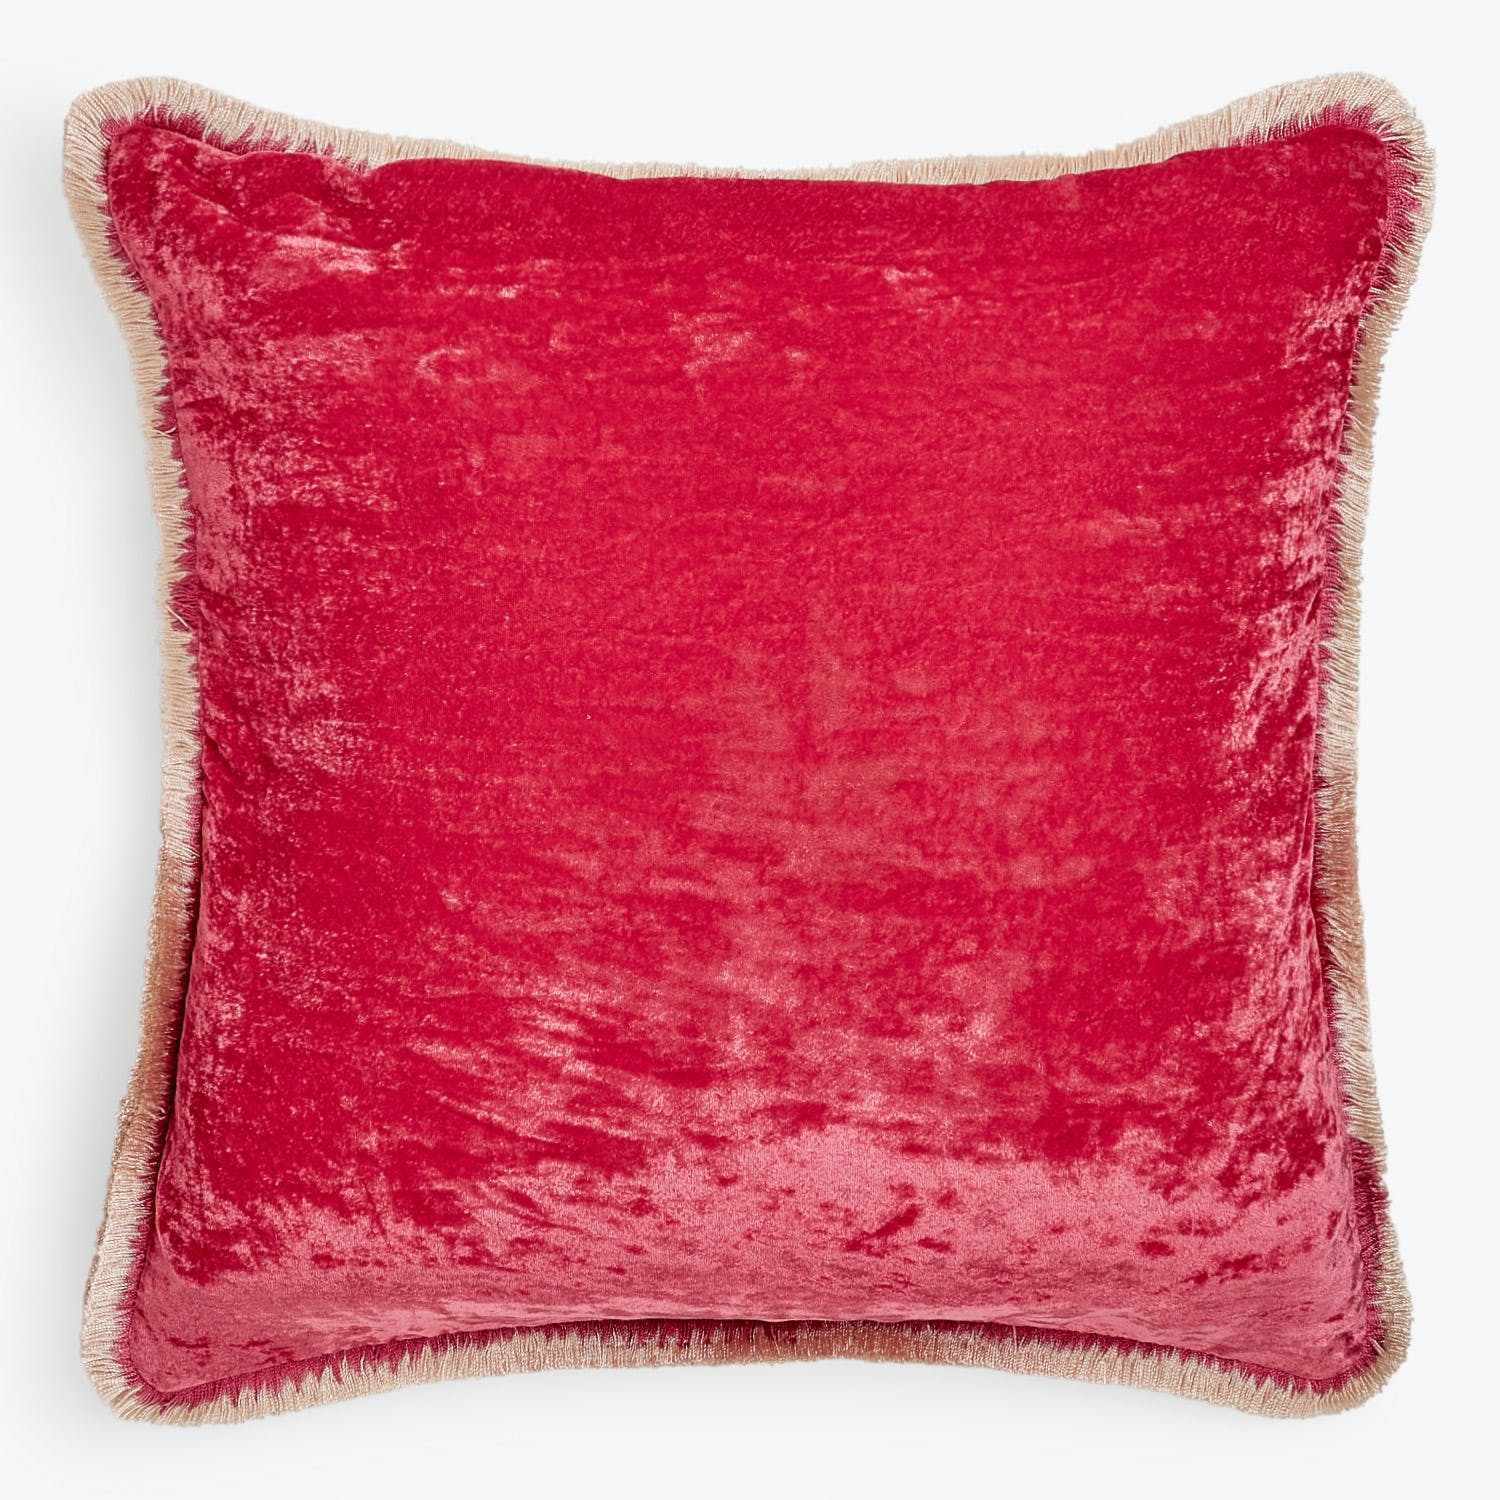 Luxurious red velvet throw pillow with gold flange accent.